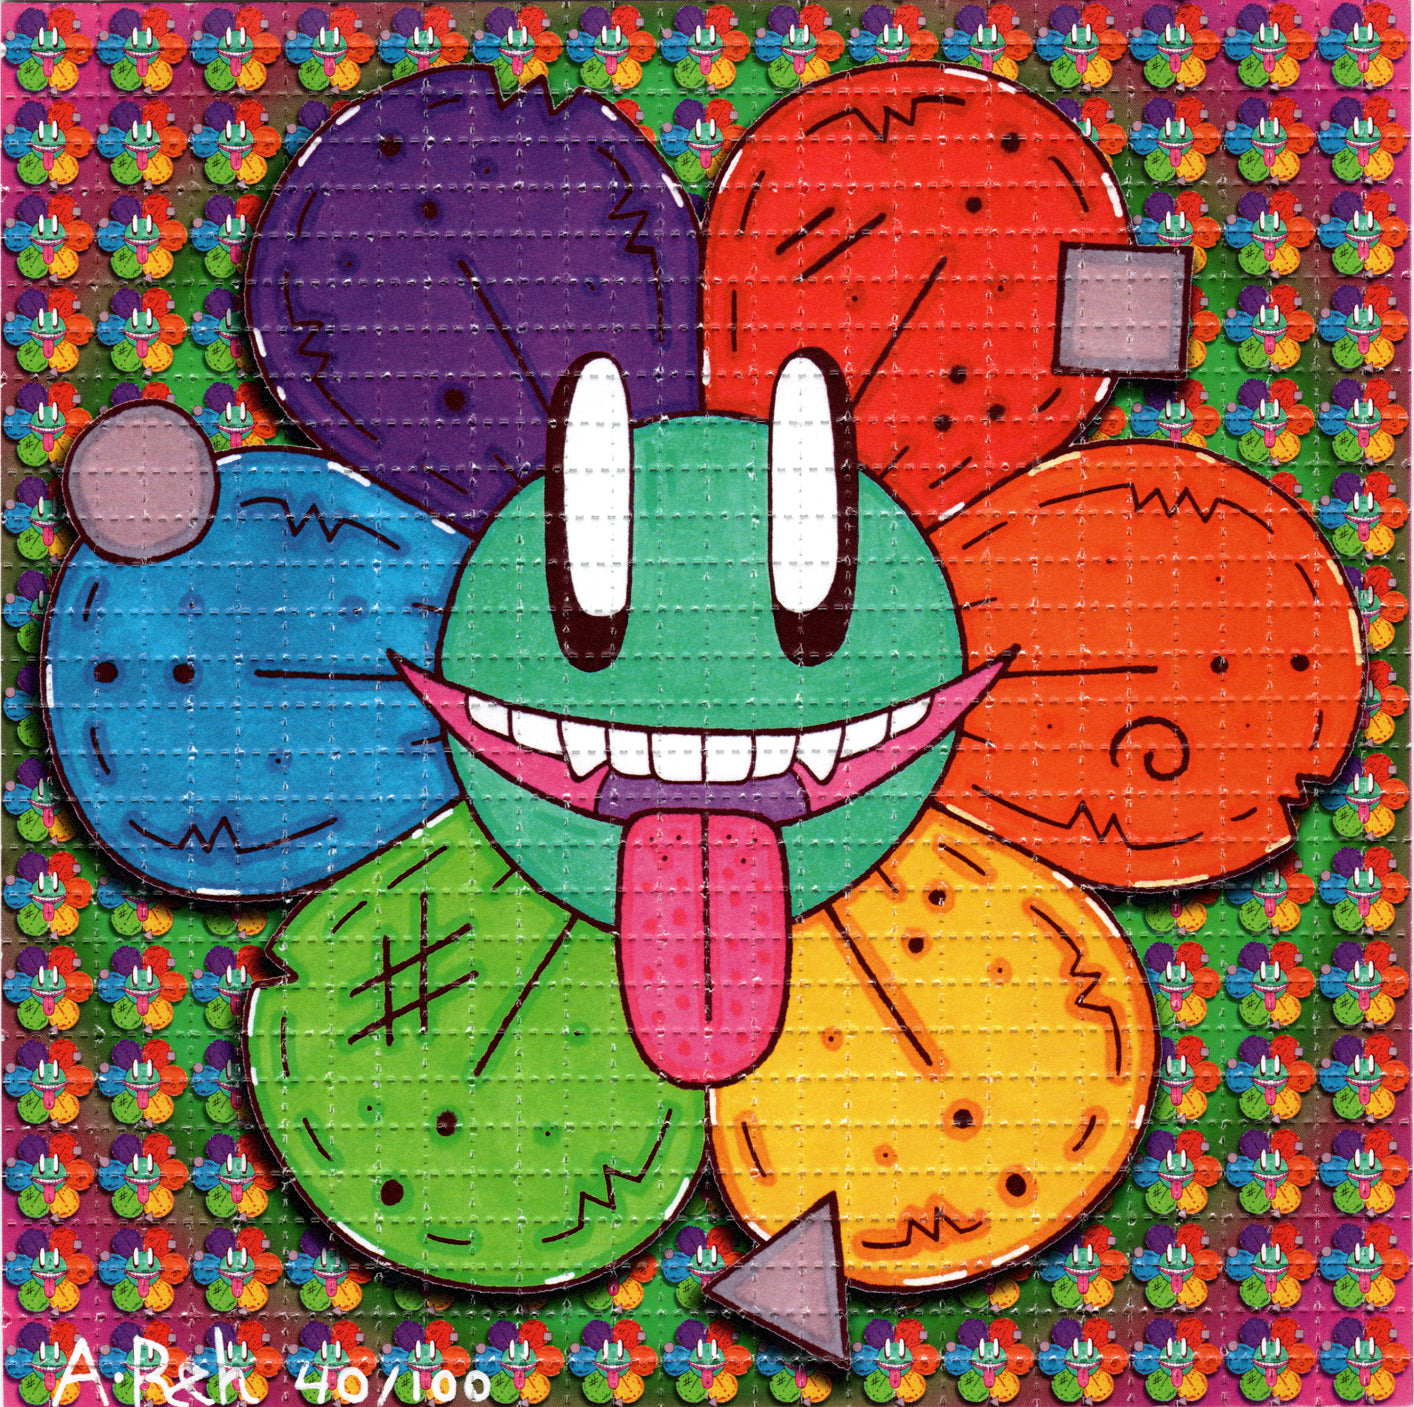 The Smile Flower by Aaron Rehschuh Areh SIGNED Limited Edition LSD blotter art print